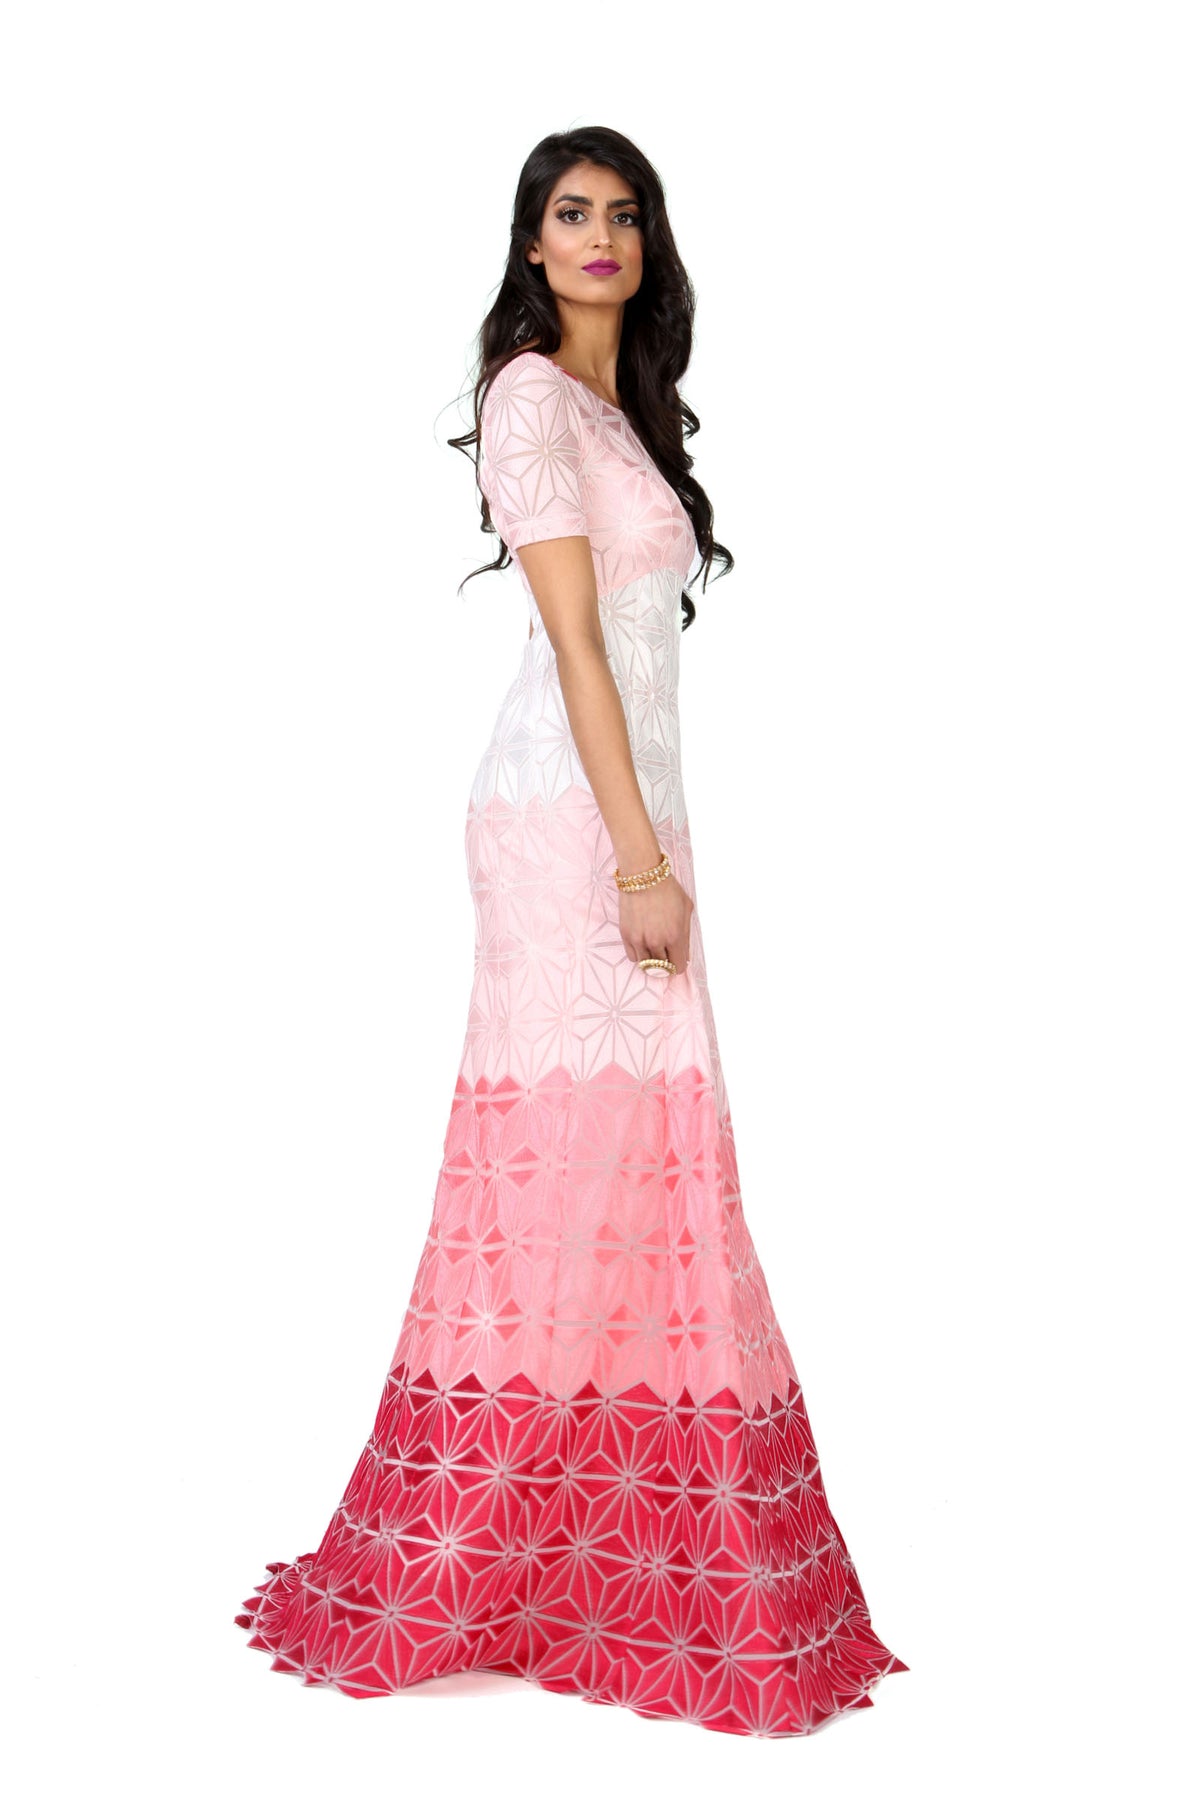 ANISA Ombre Embroidery Maxi Dress - Side View - Harleen Kaur Womenswear - Sample Sale